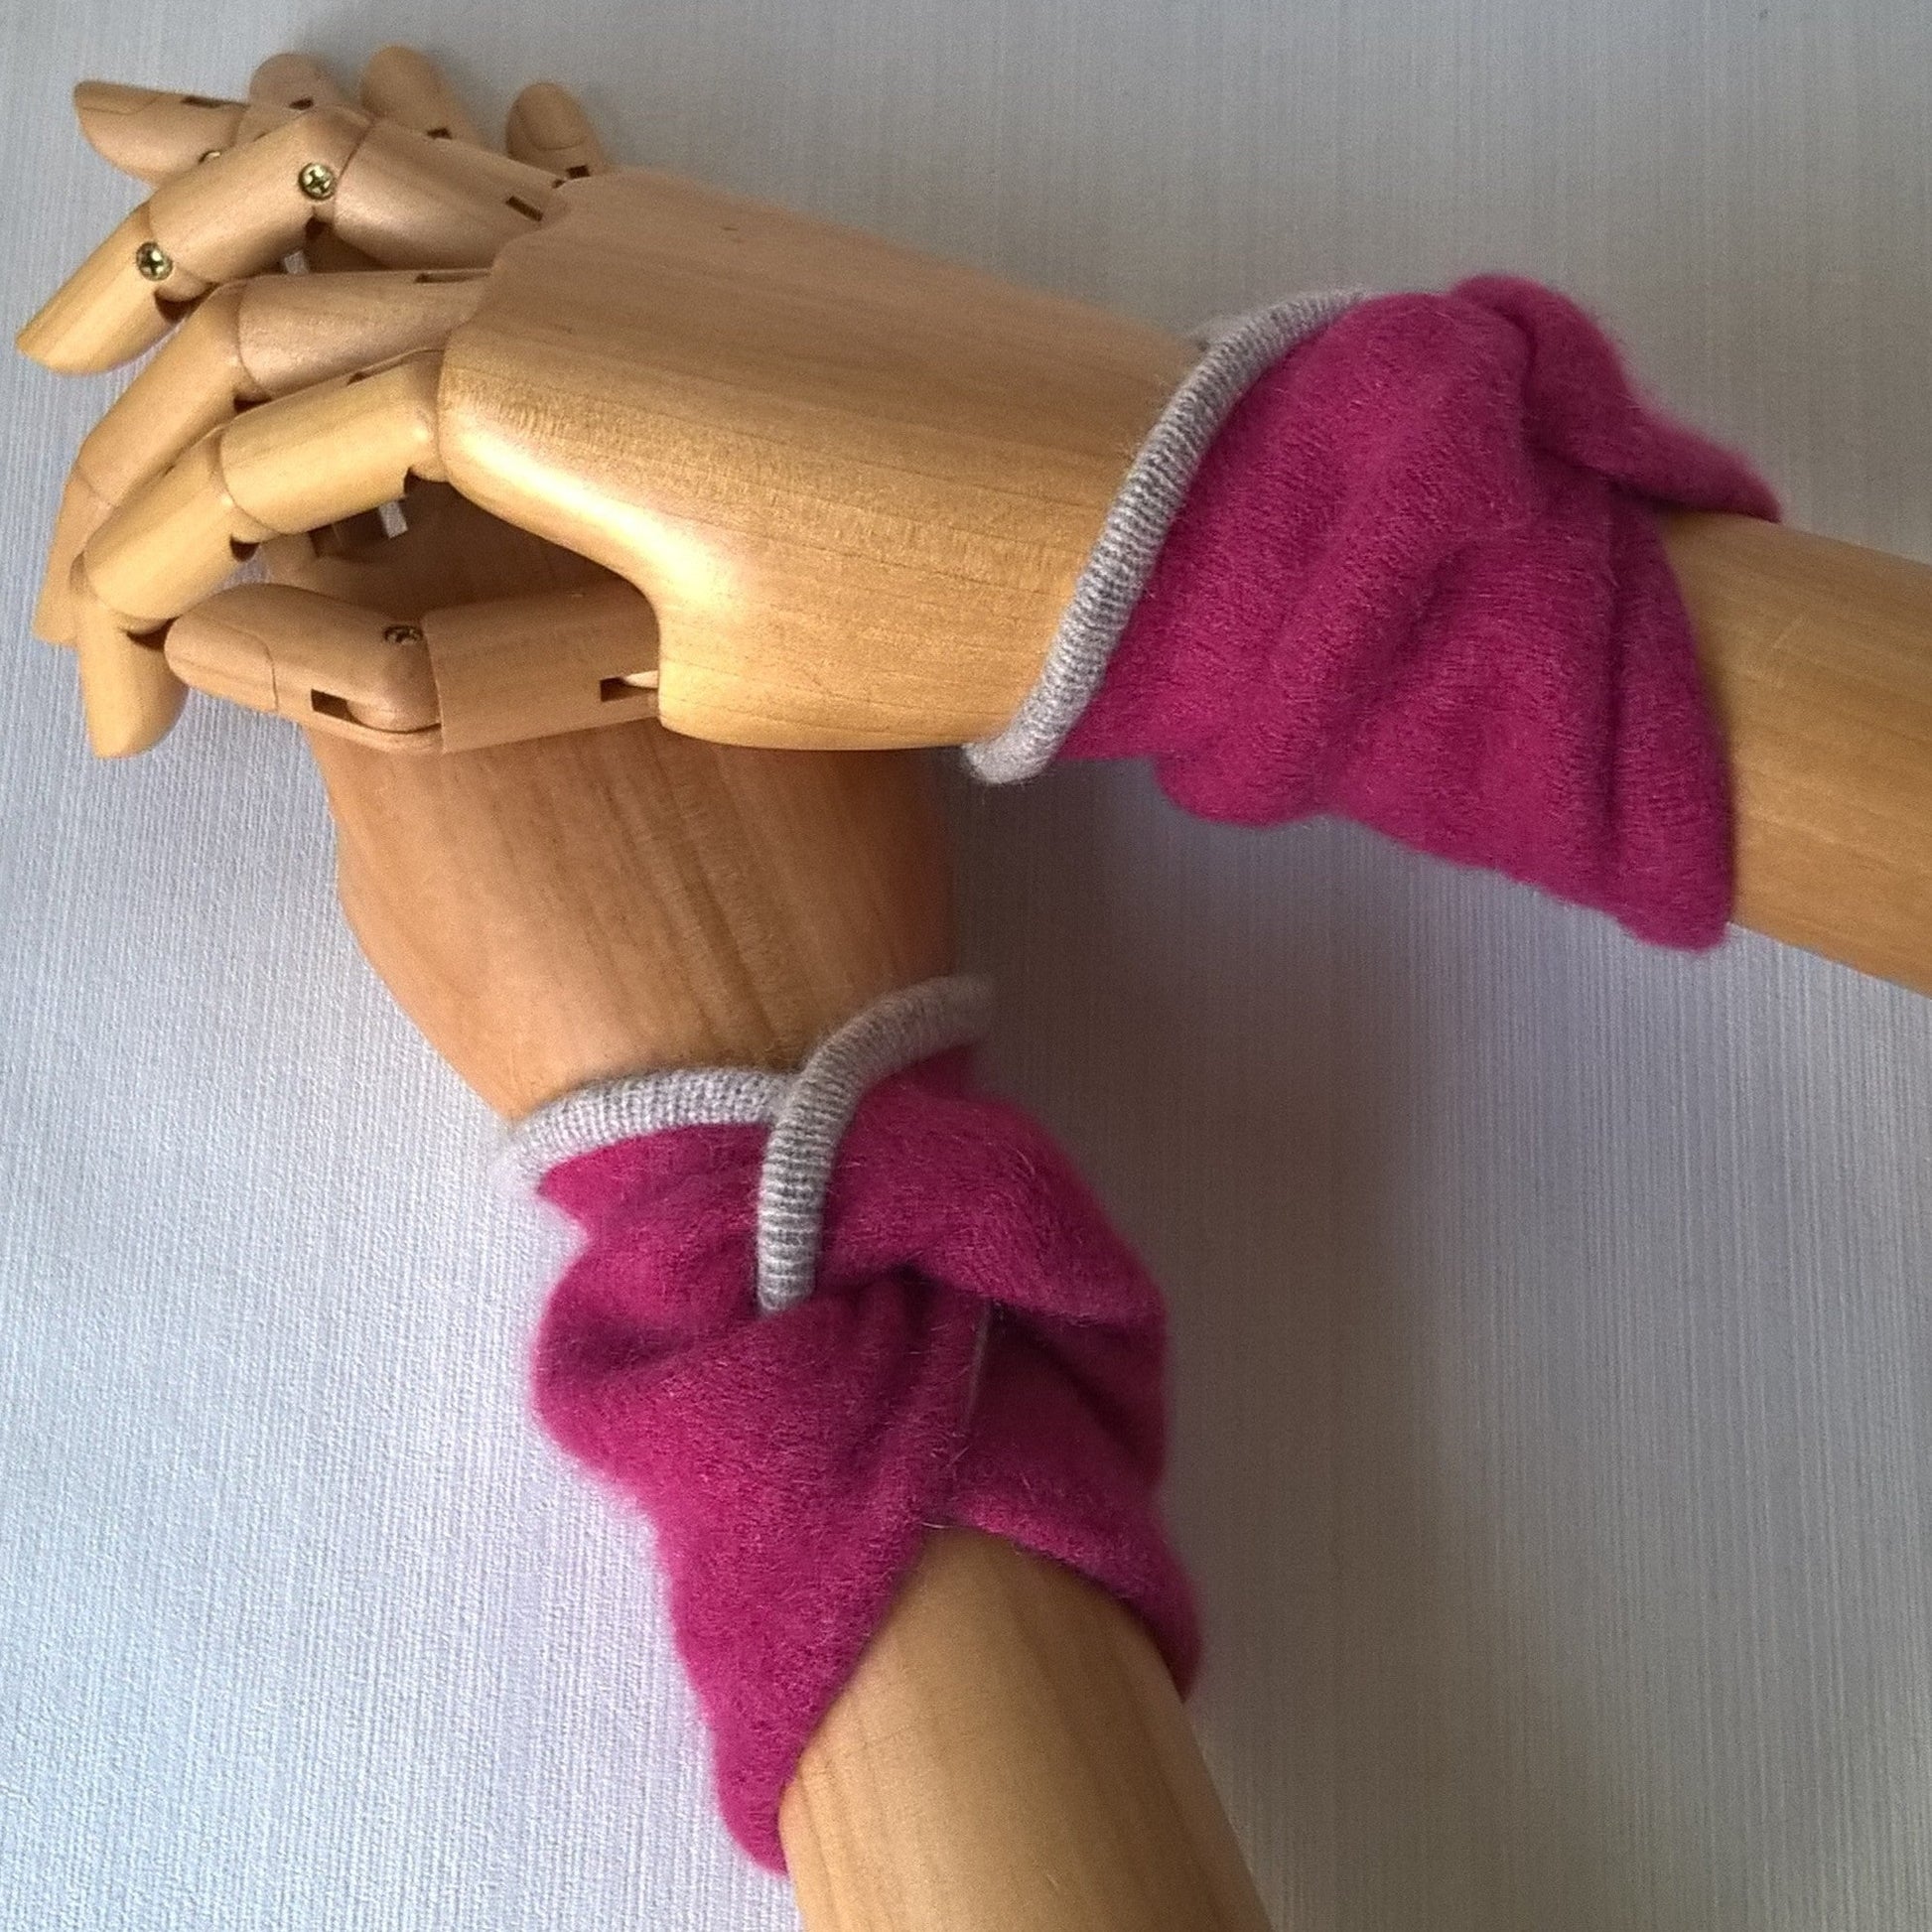 Raspberry pink wrist warmers in a twisted knot design